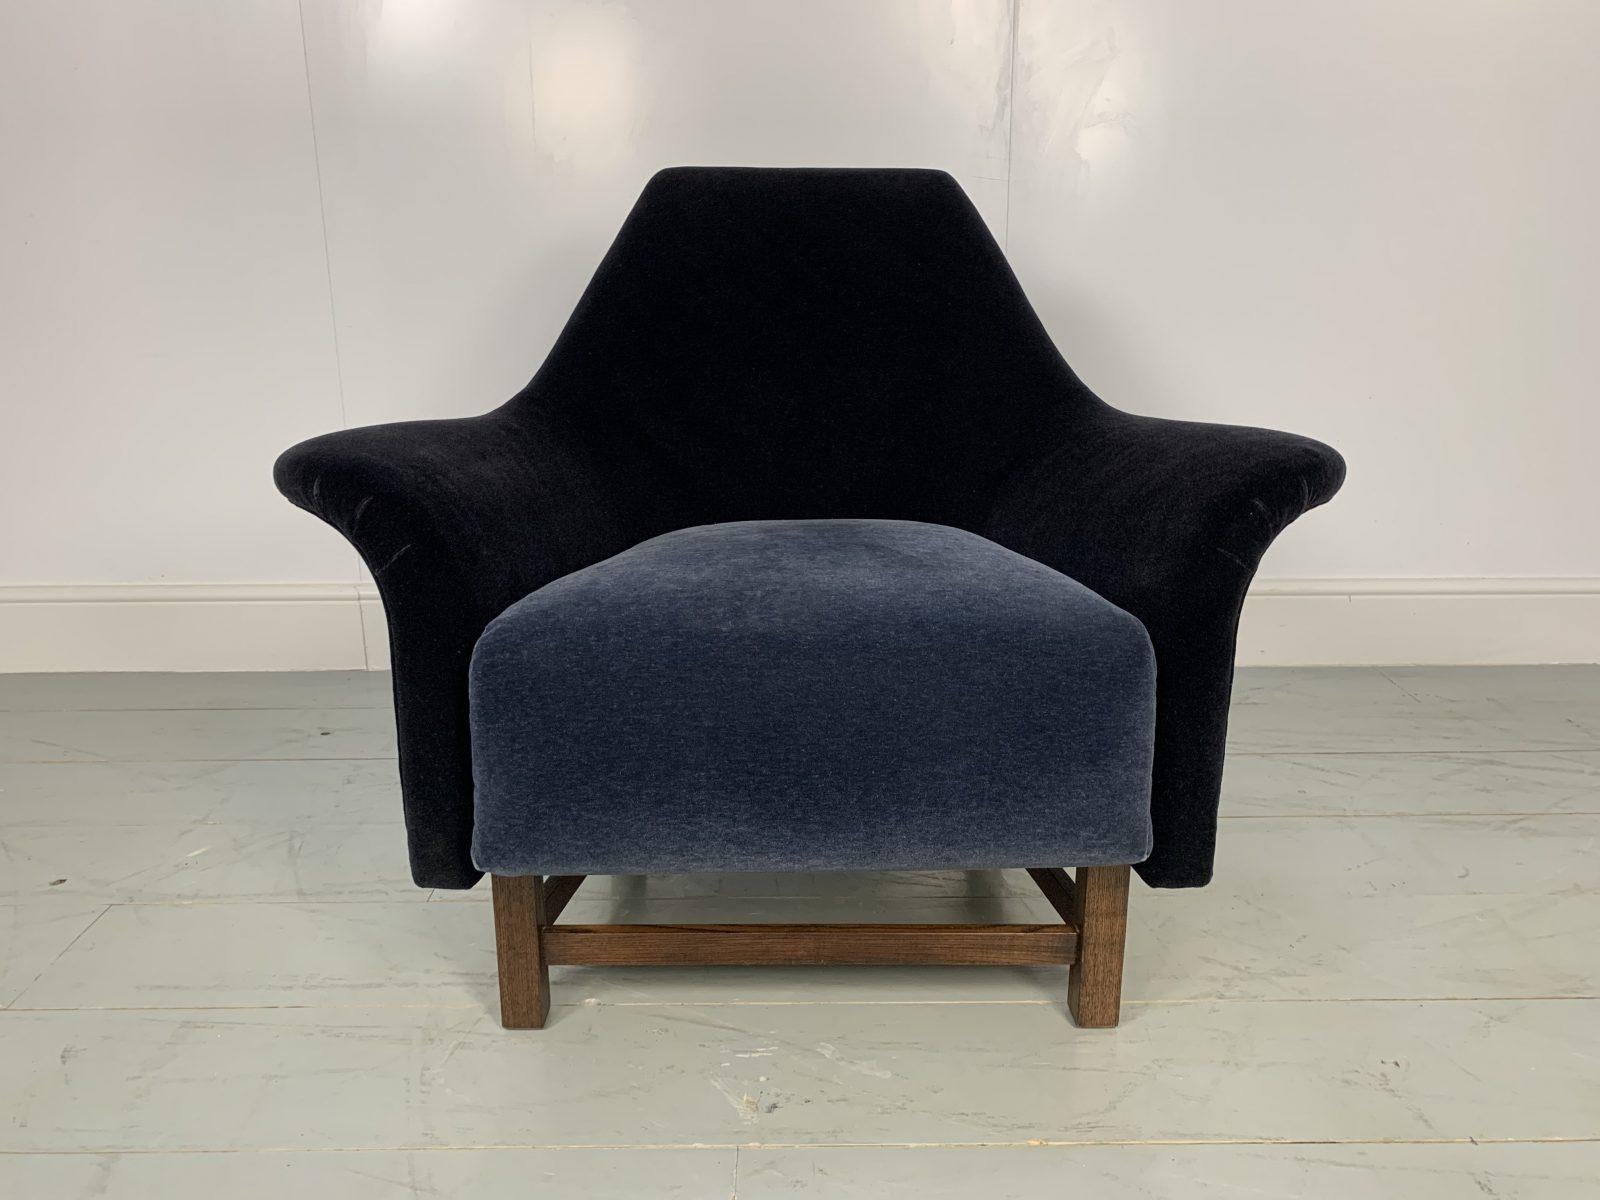 Hello Friends.

On offer on this occasion is the rarest-of-the-rare, it being a peerless, immaculate Tom Dixon-designed “Justice” Armchair from George Smith, dressed in a peerless, elegant, top-grade and sensationally-tactile Mohair Velvet in